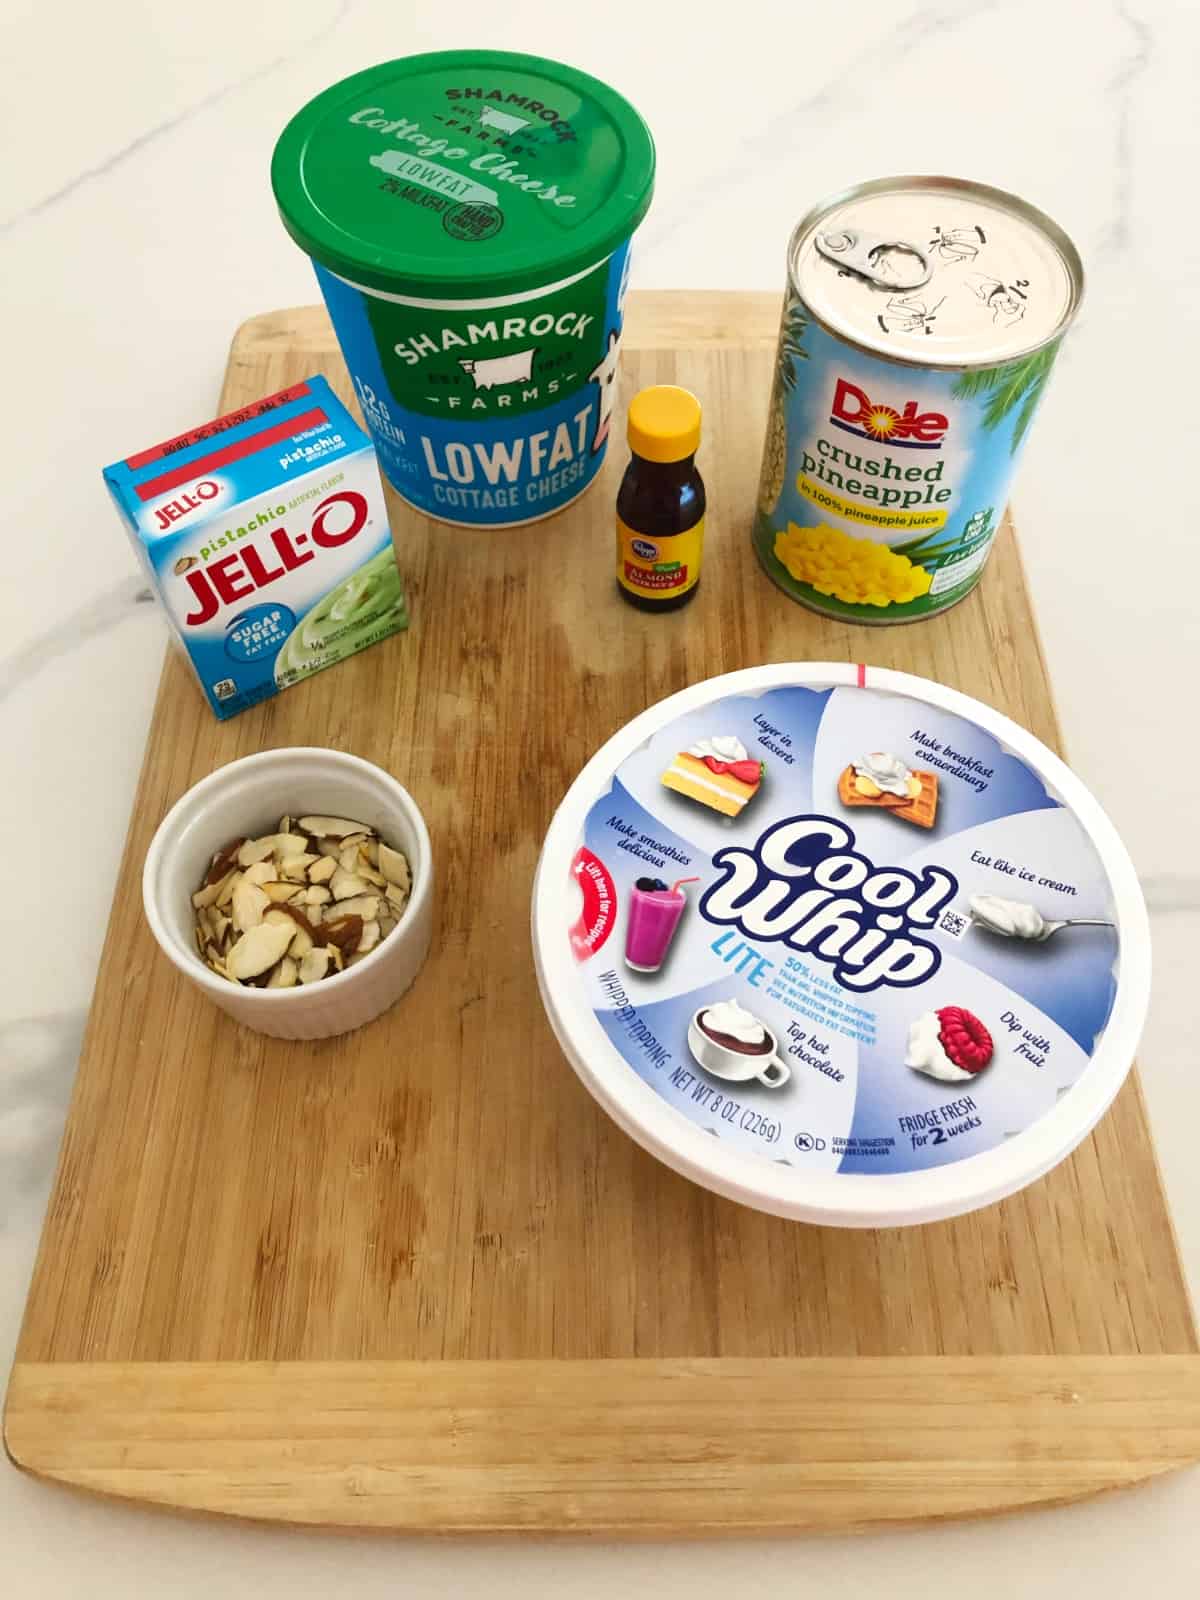 Ingredients on bamboo cutting board including pistachio pudding mix, cottage cheese, pineapple, cool whip and sliced almonds.